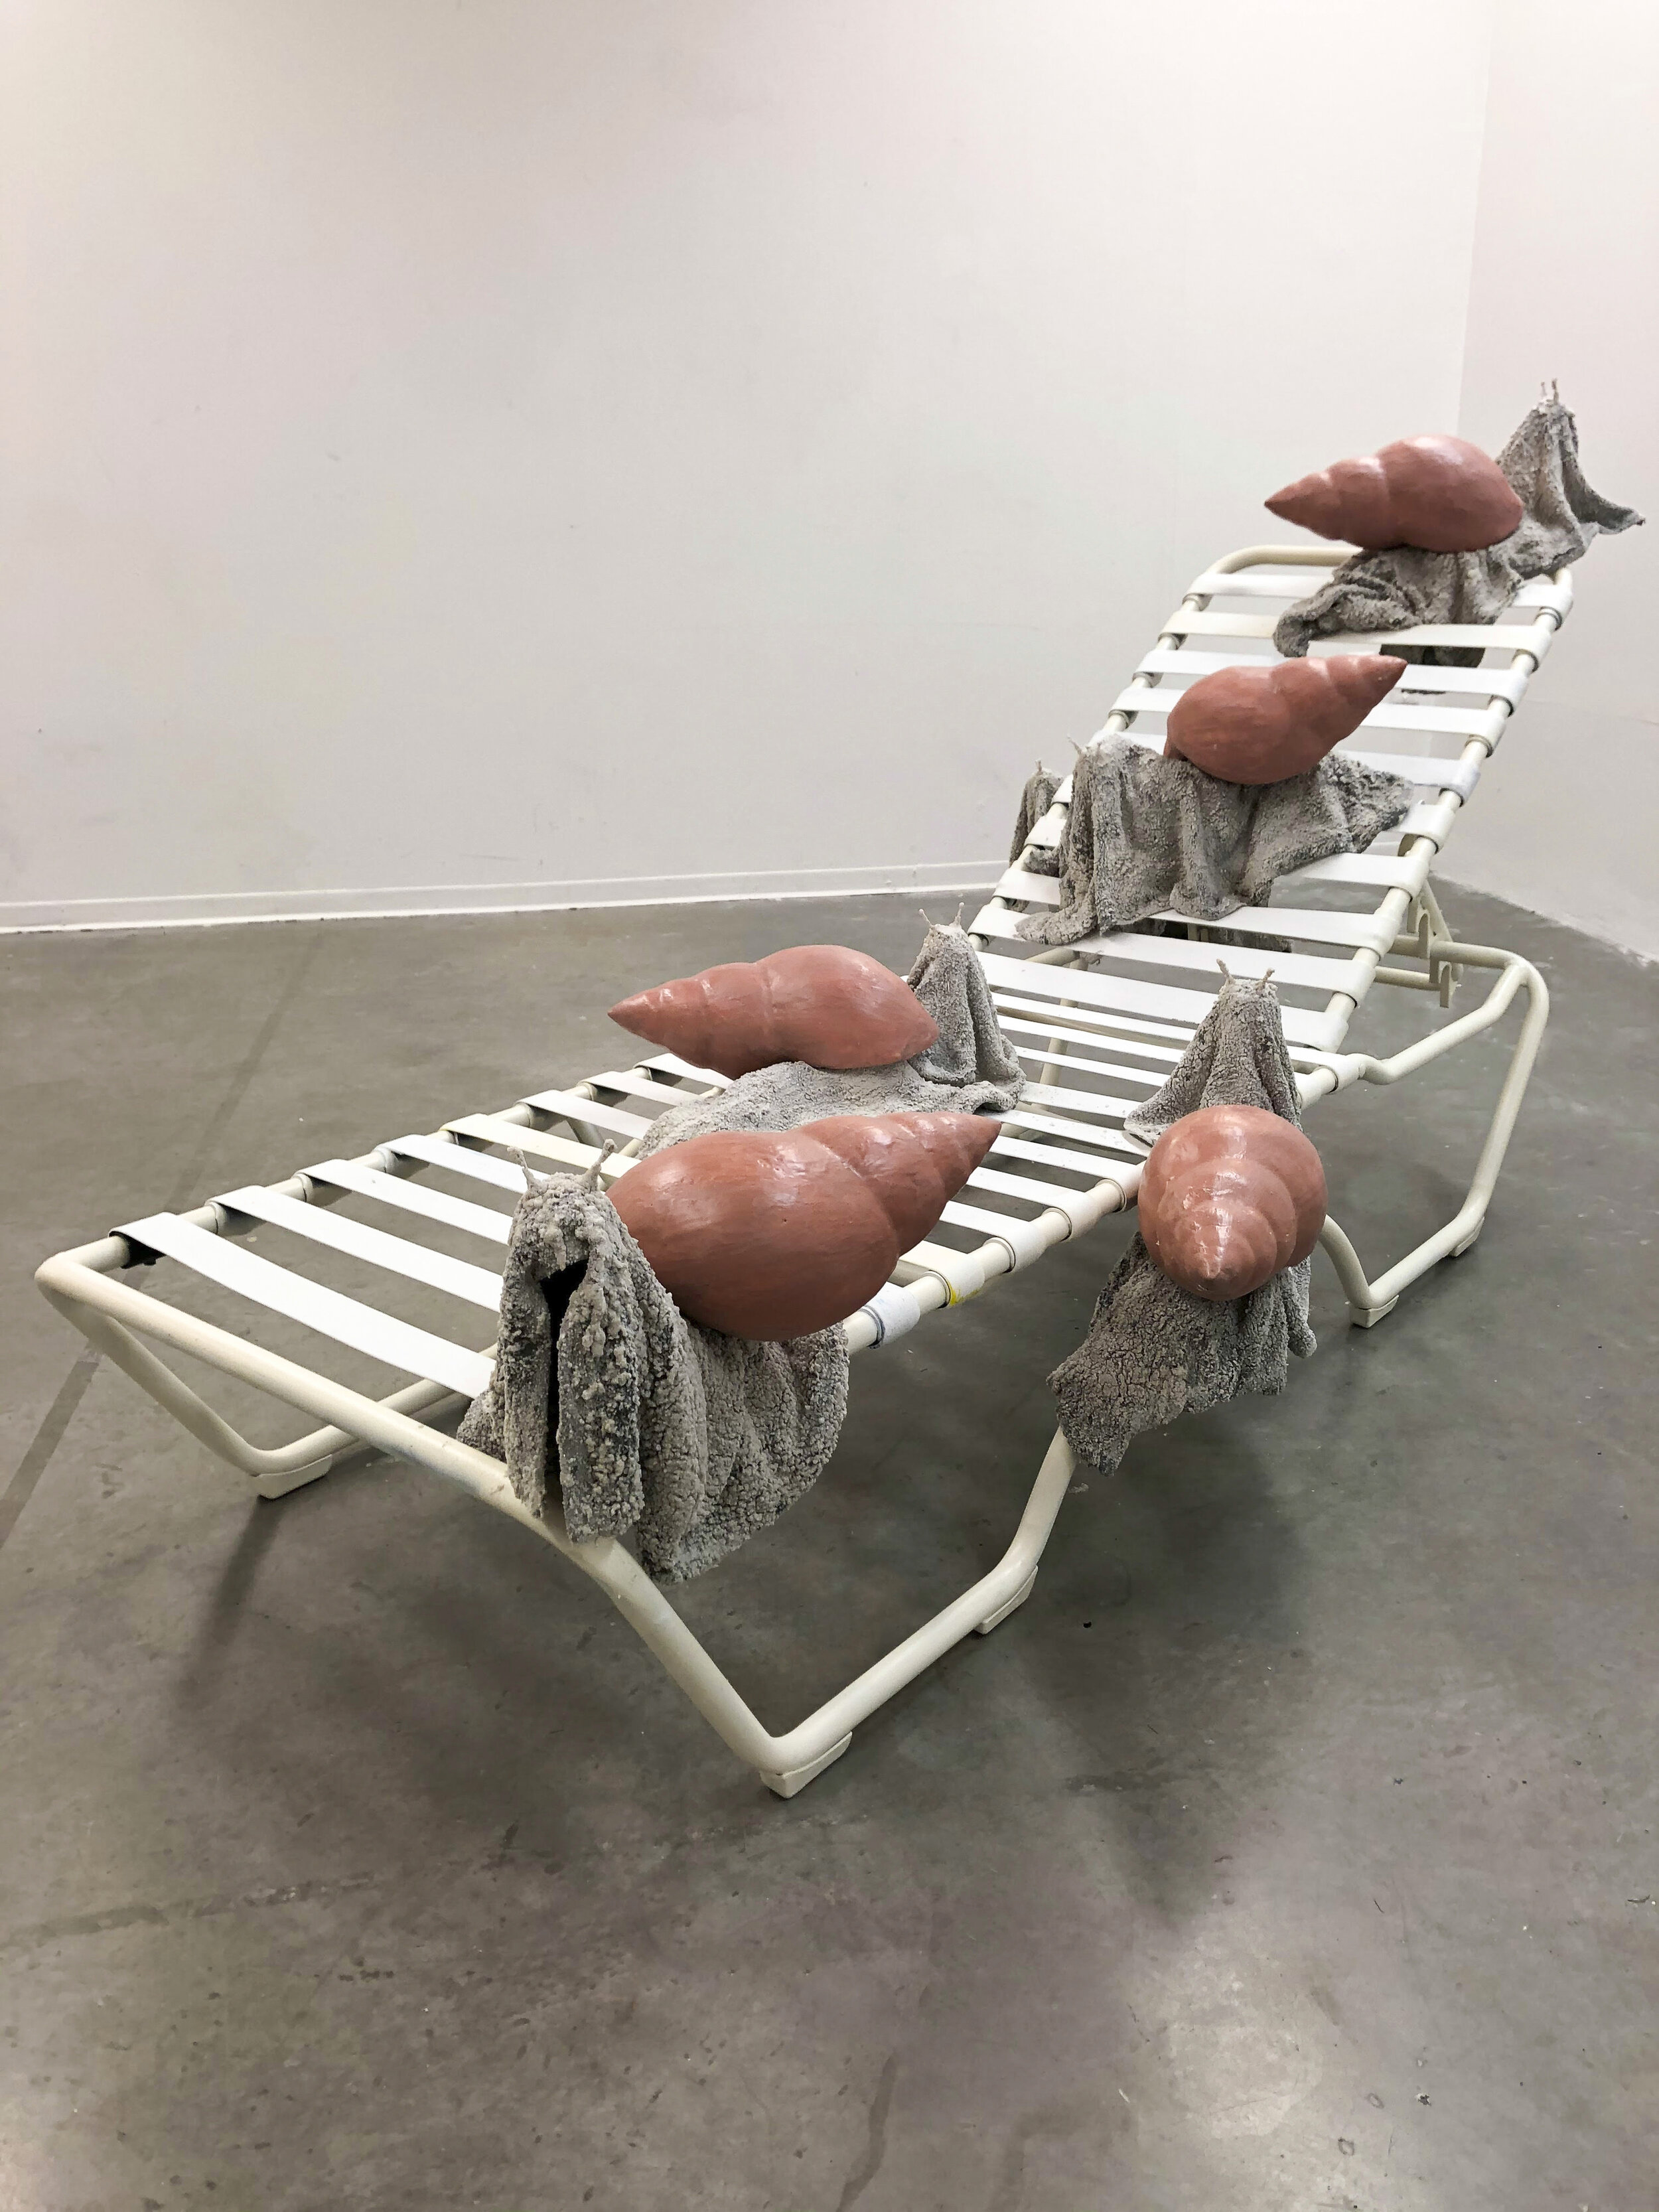  Alex Zak  Ship of Fools , 2020 Modified lounge chair, towels, pearl sewing needles, sand, epoxy resin, foam, paint 54 x 108 x 48 inches (137 x 274 x 122 cm)   